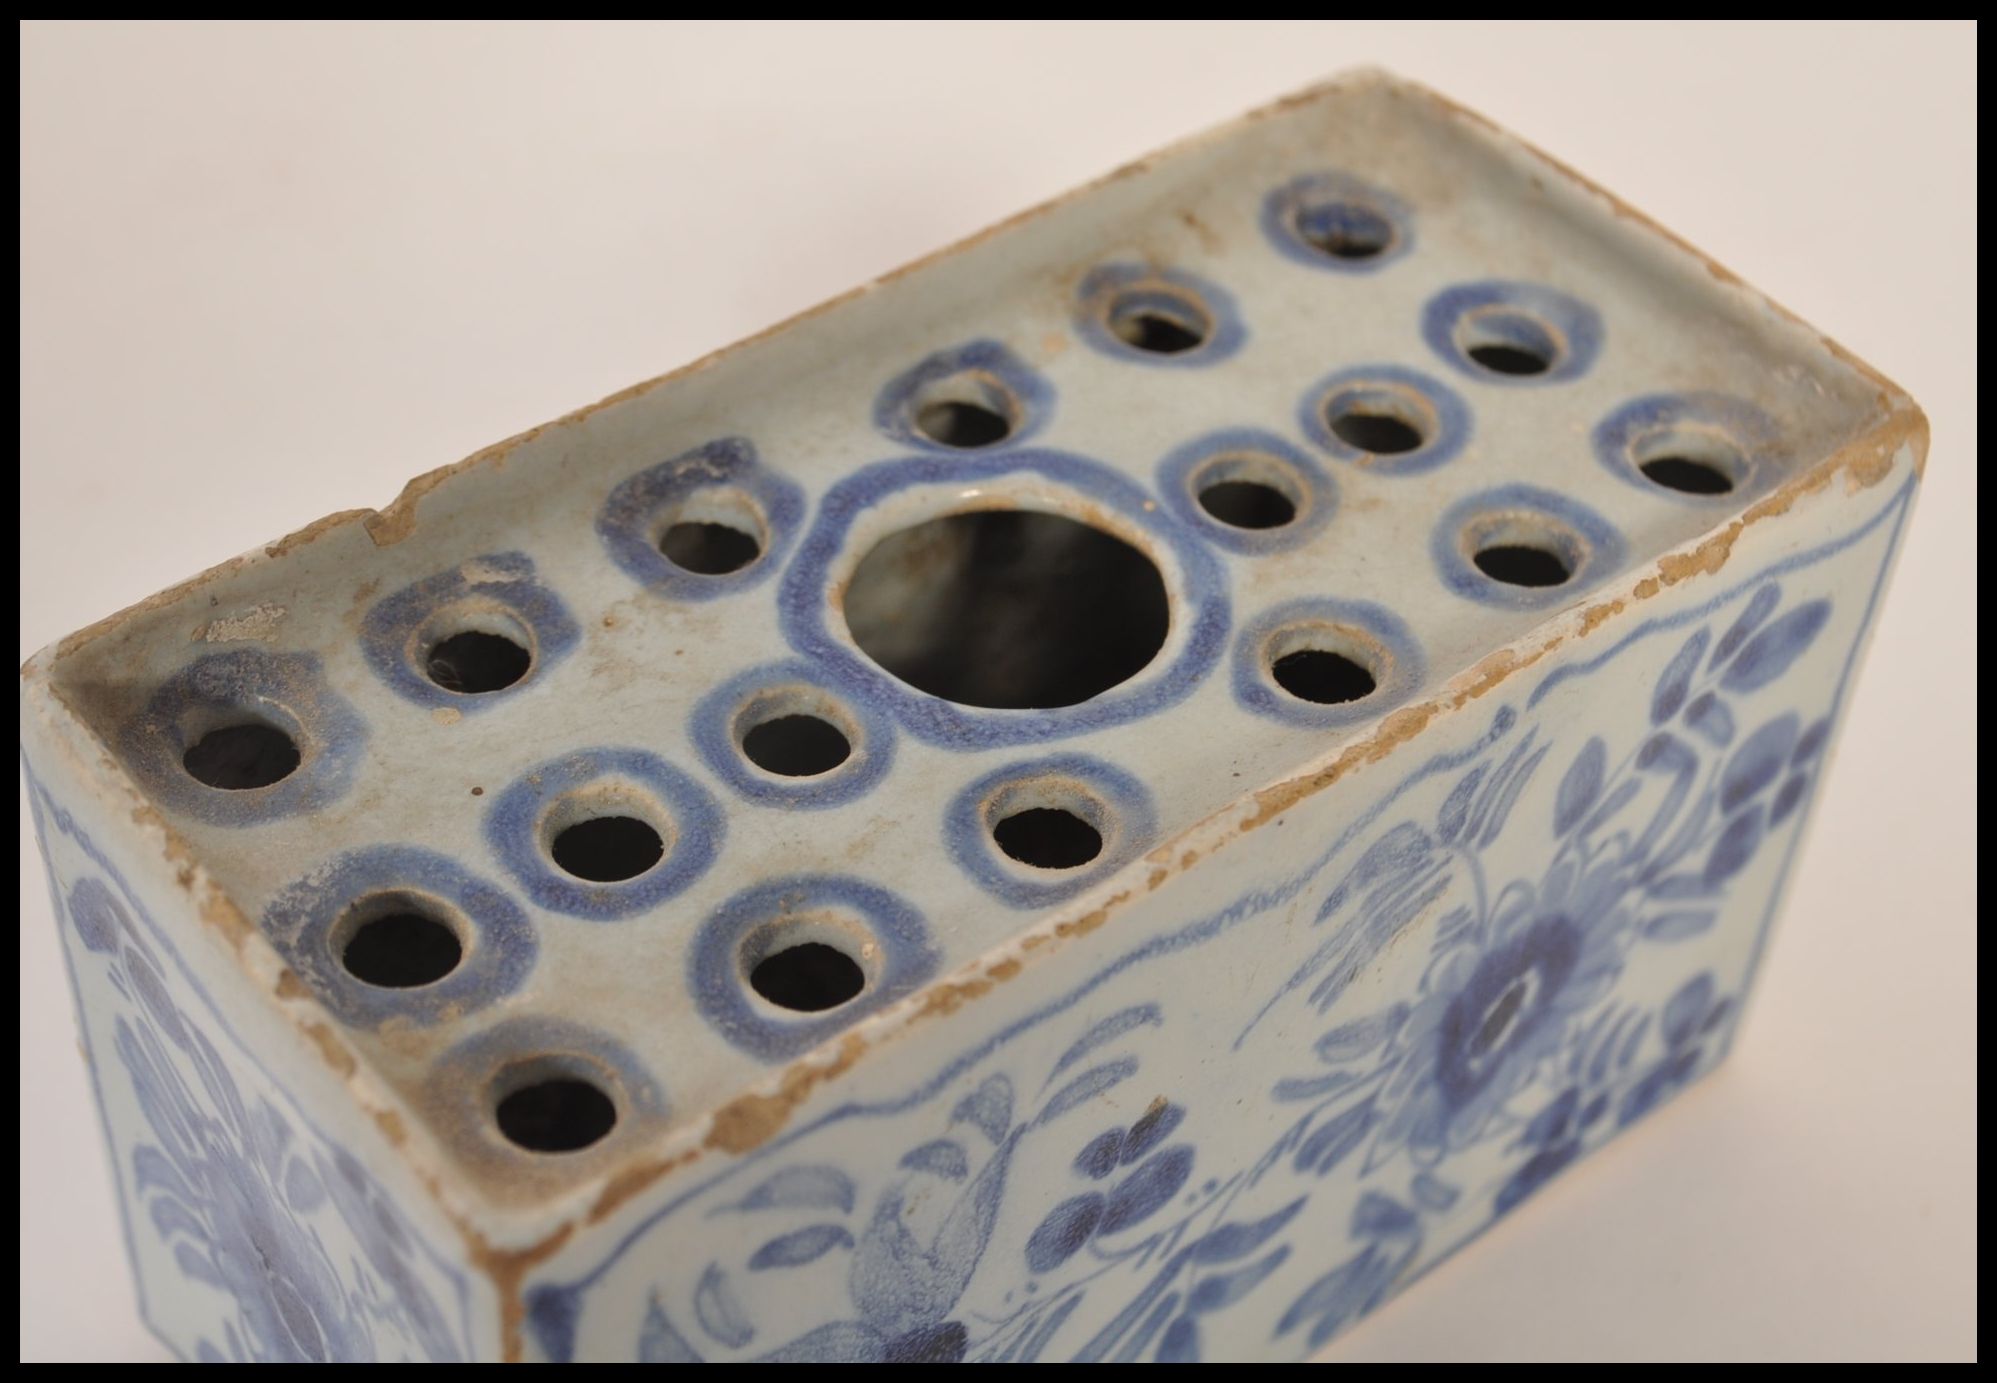 18TH CENTURY ENGLISH DELFT BLUE AND WHITE FLOWER BRICK - Image 2 of 5